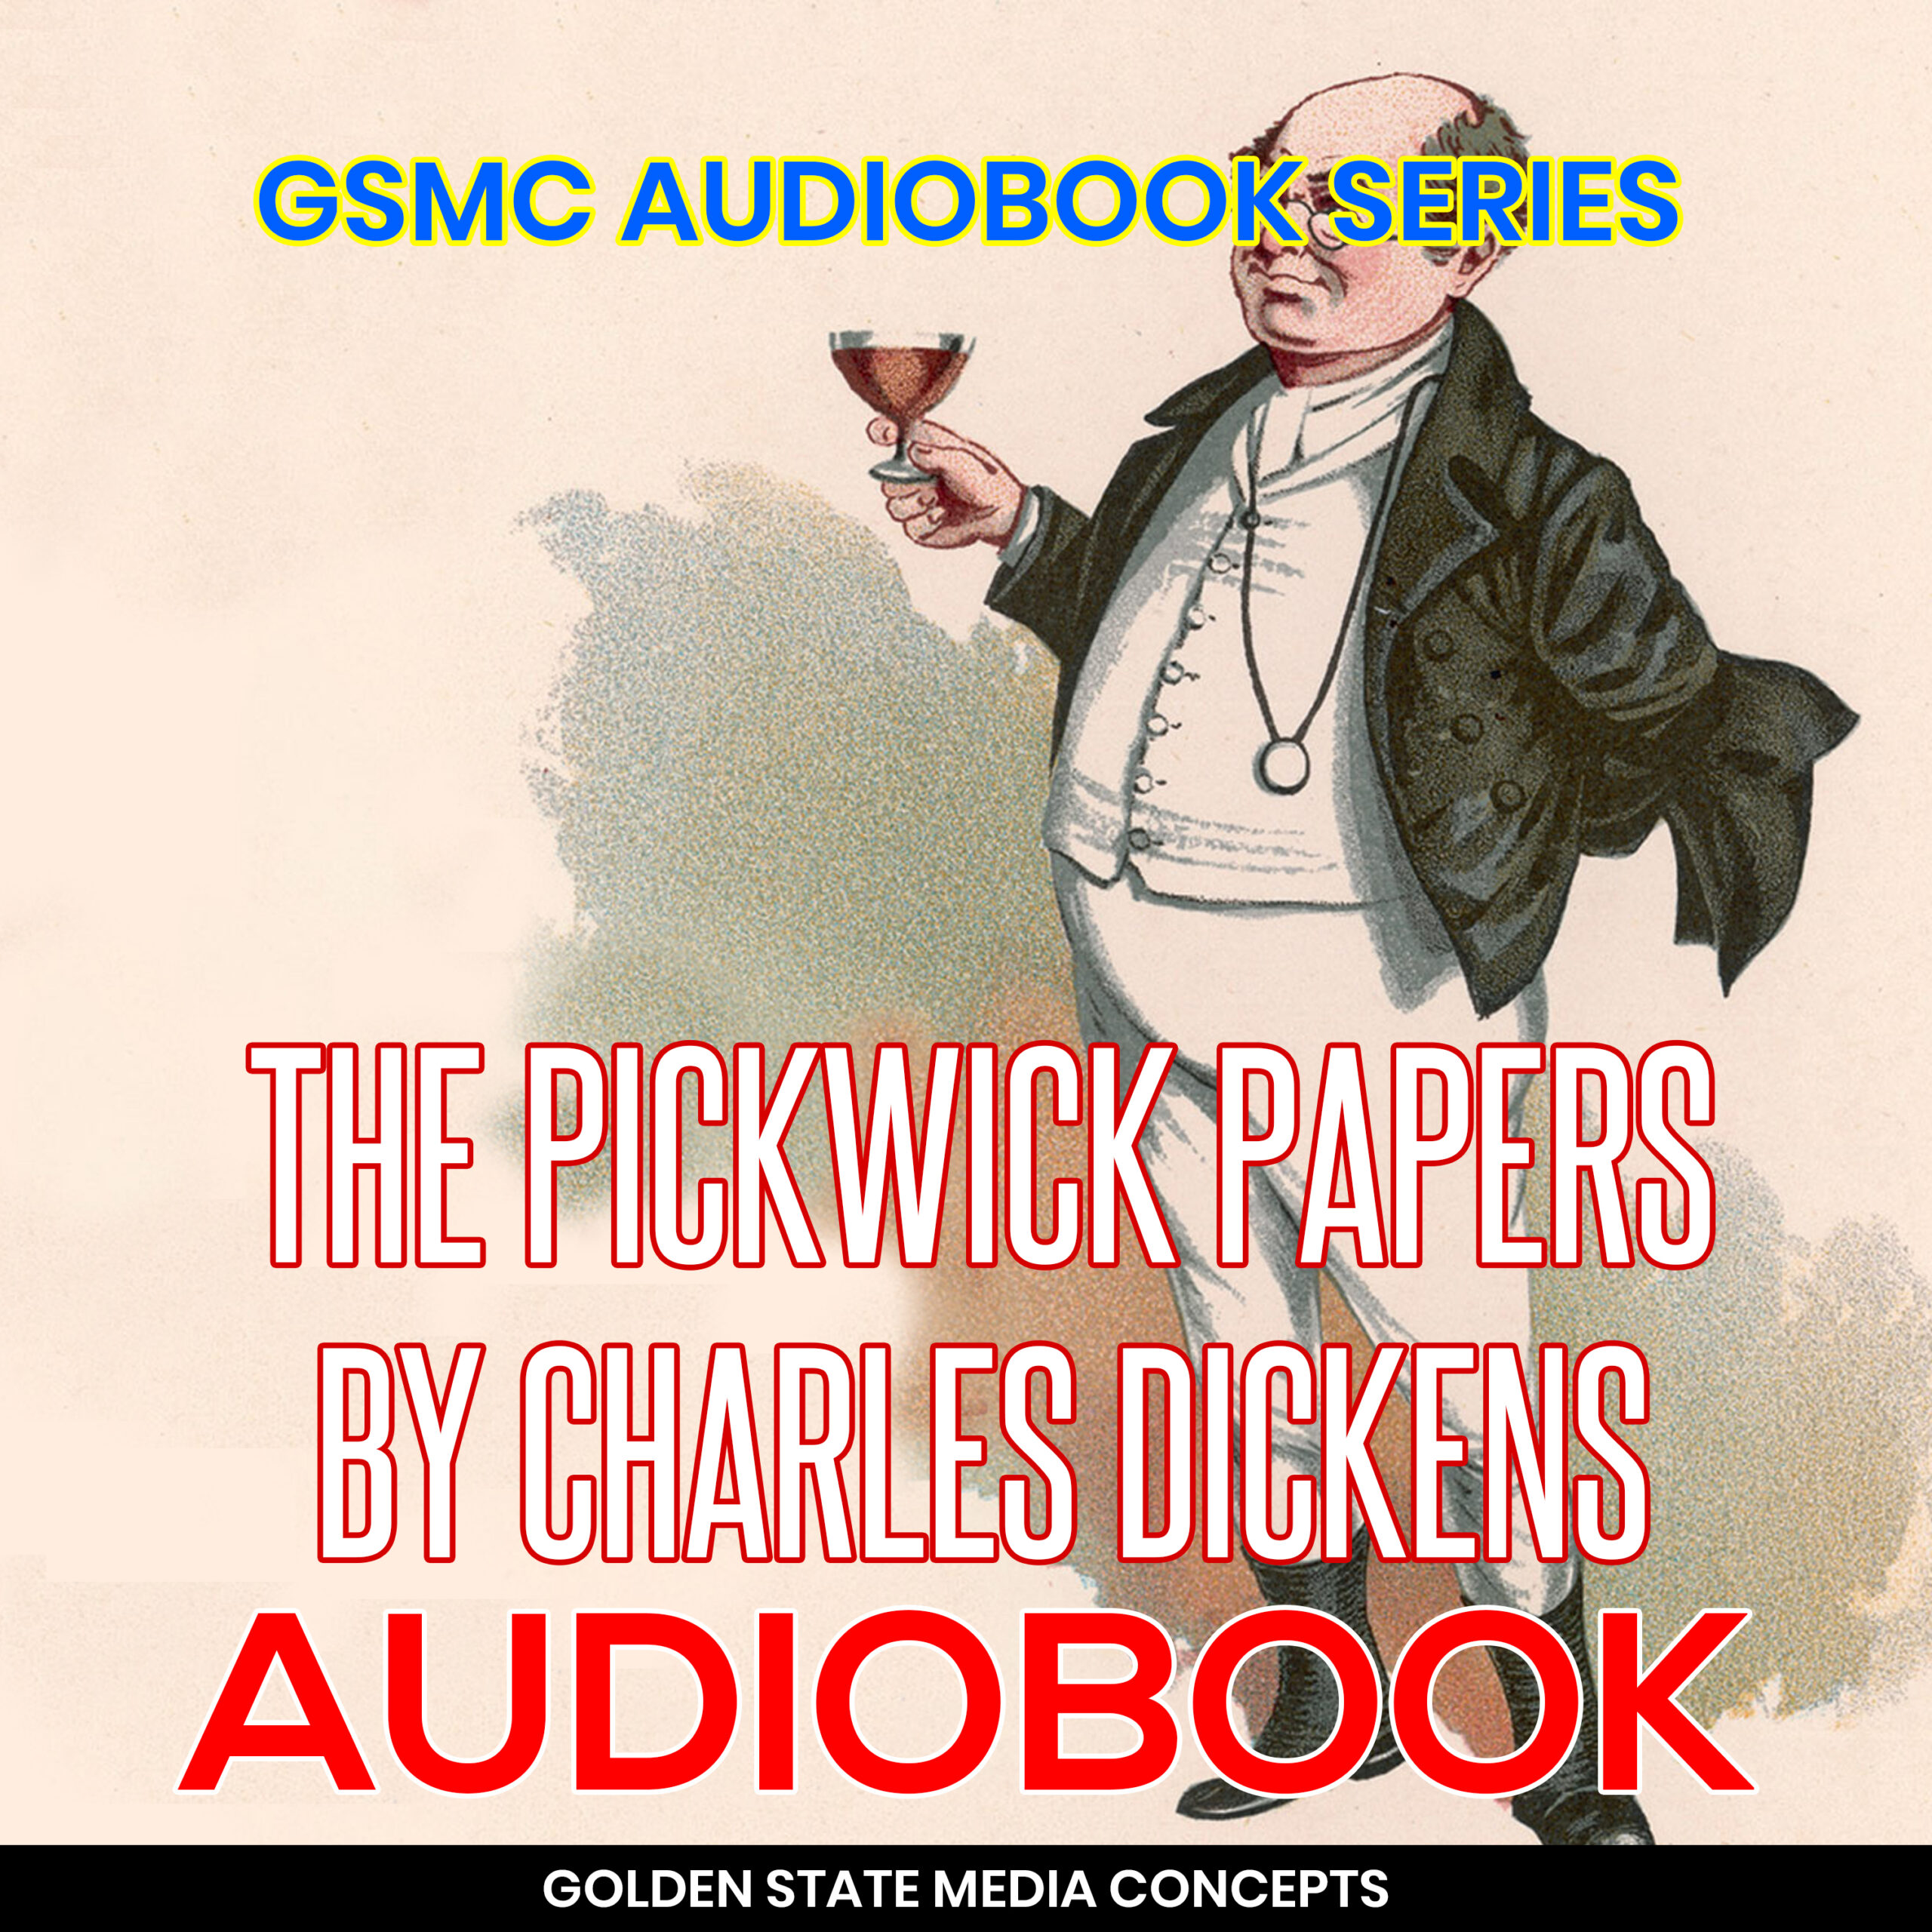 GSMC Audiobook Series: The Pickwick Papers